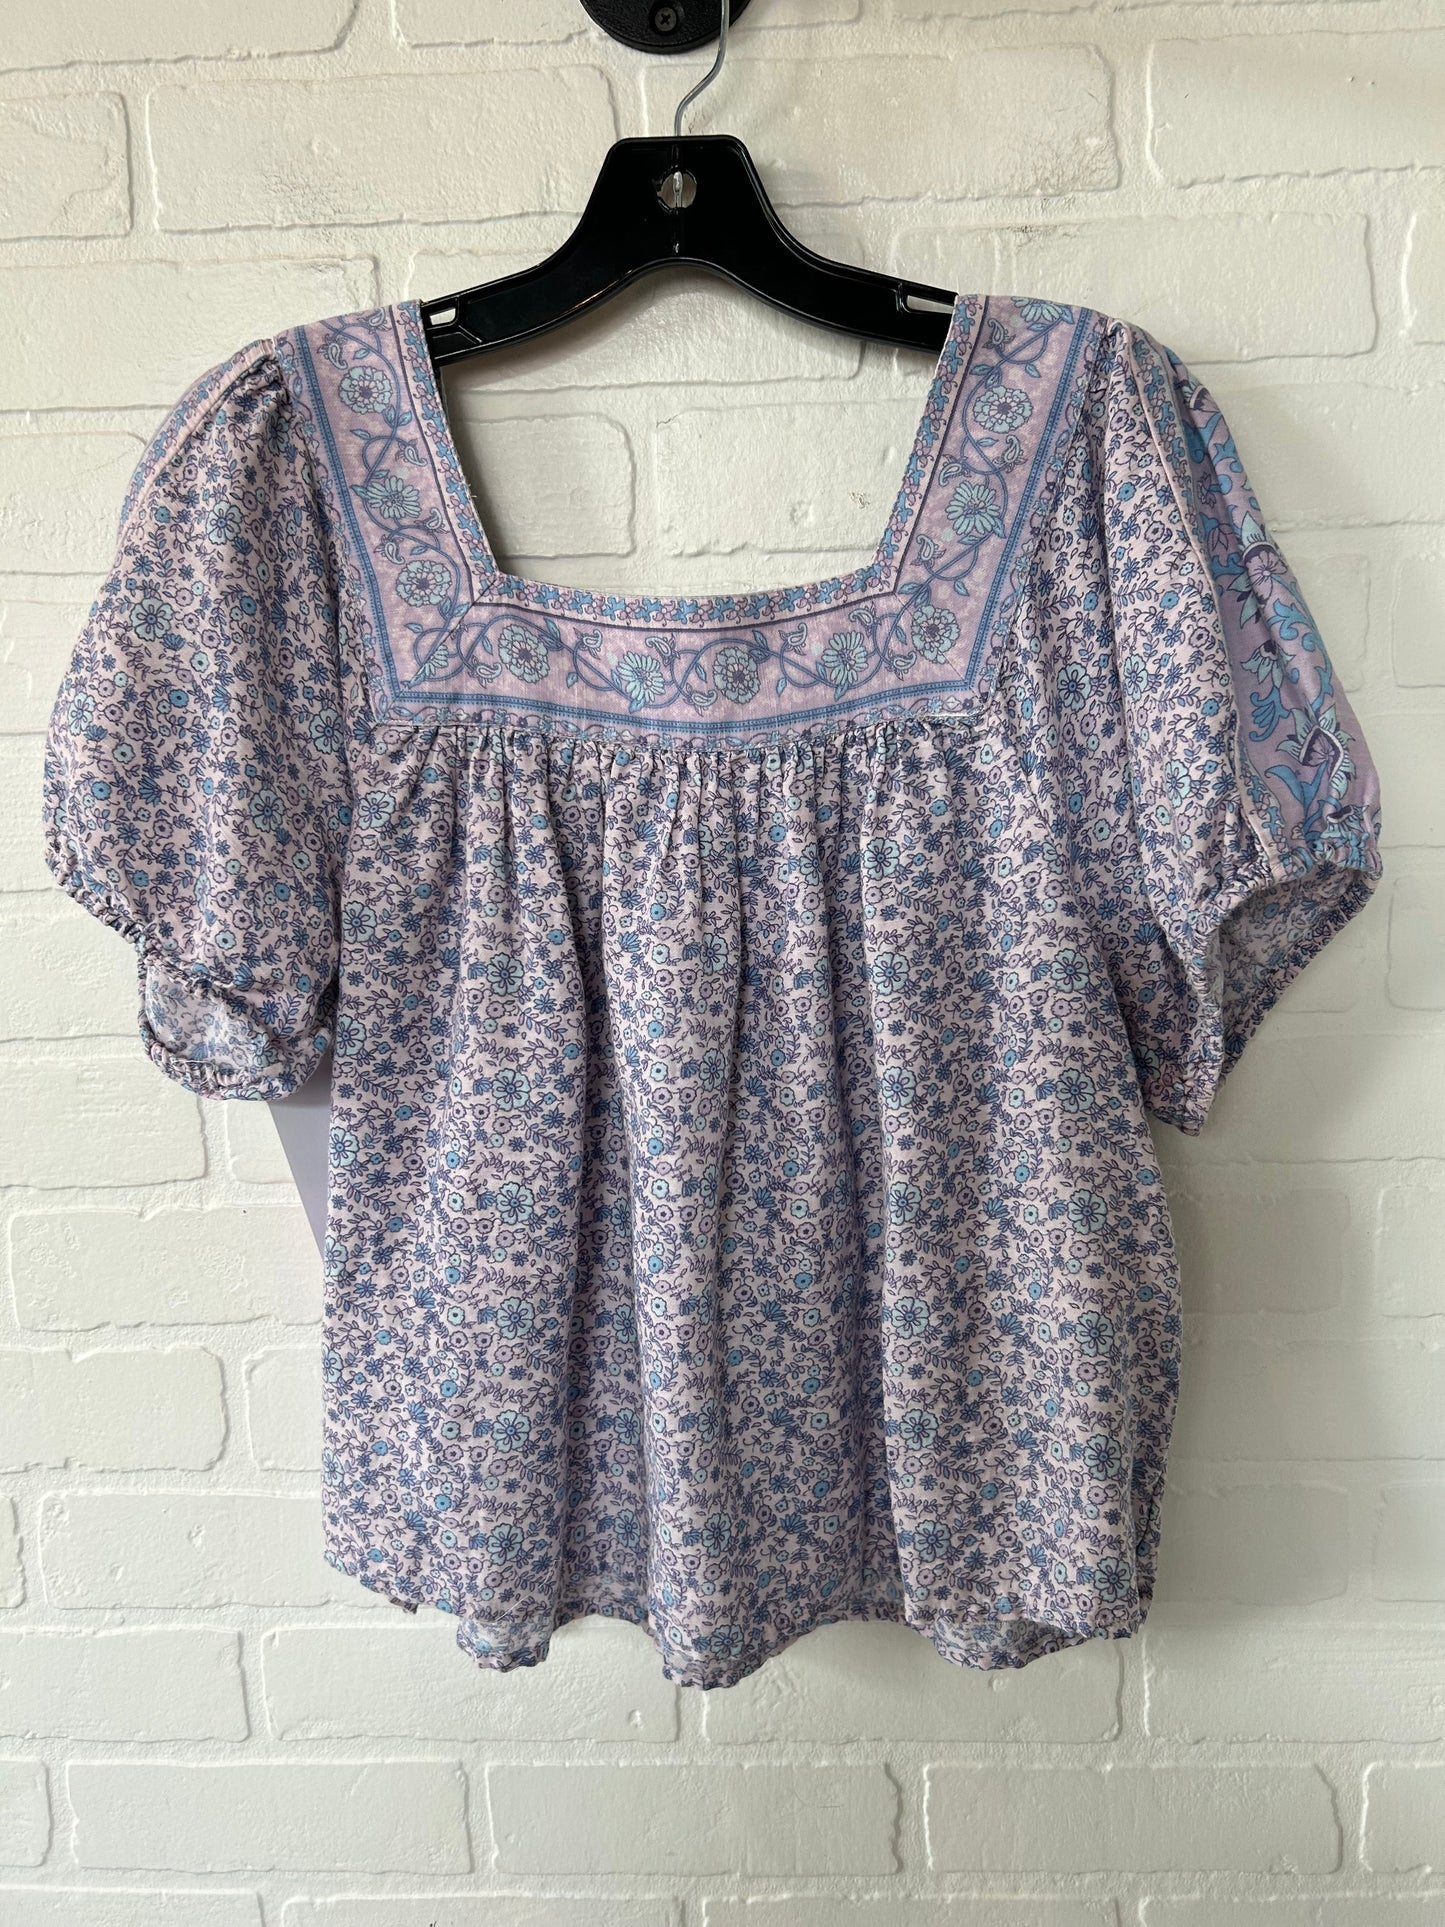 Pink & Purple Top Short Sleeve Lucky Brand, Size M